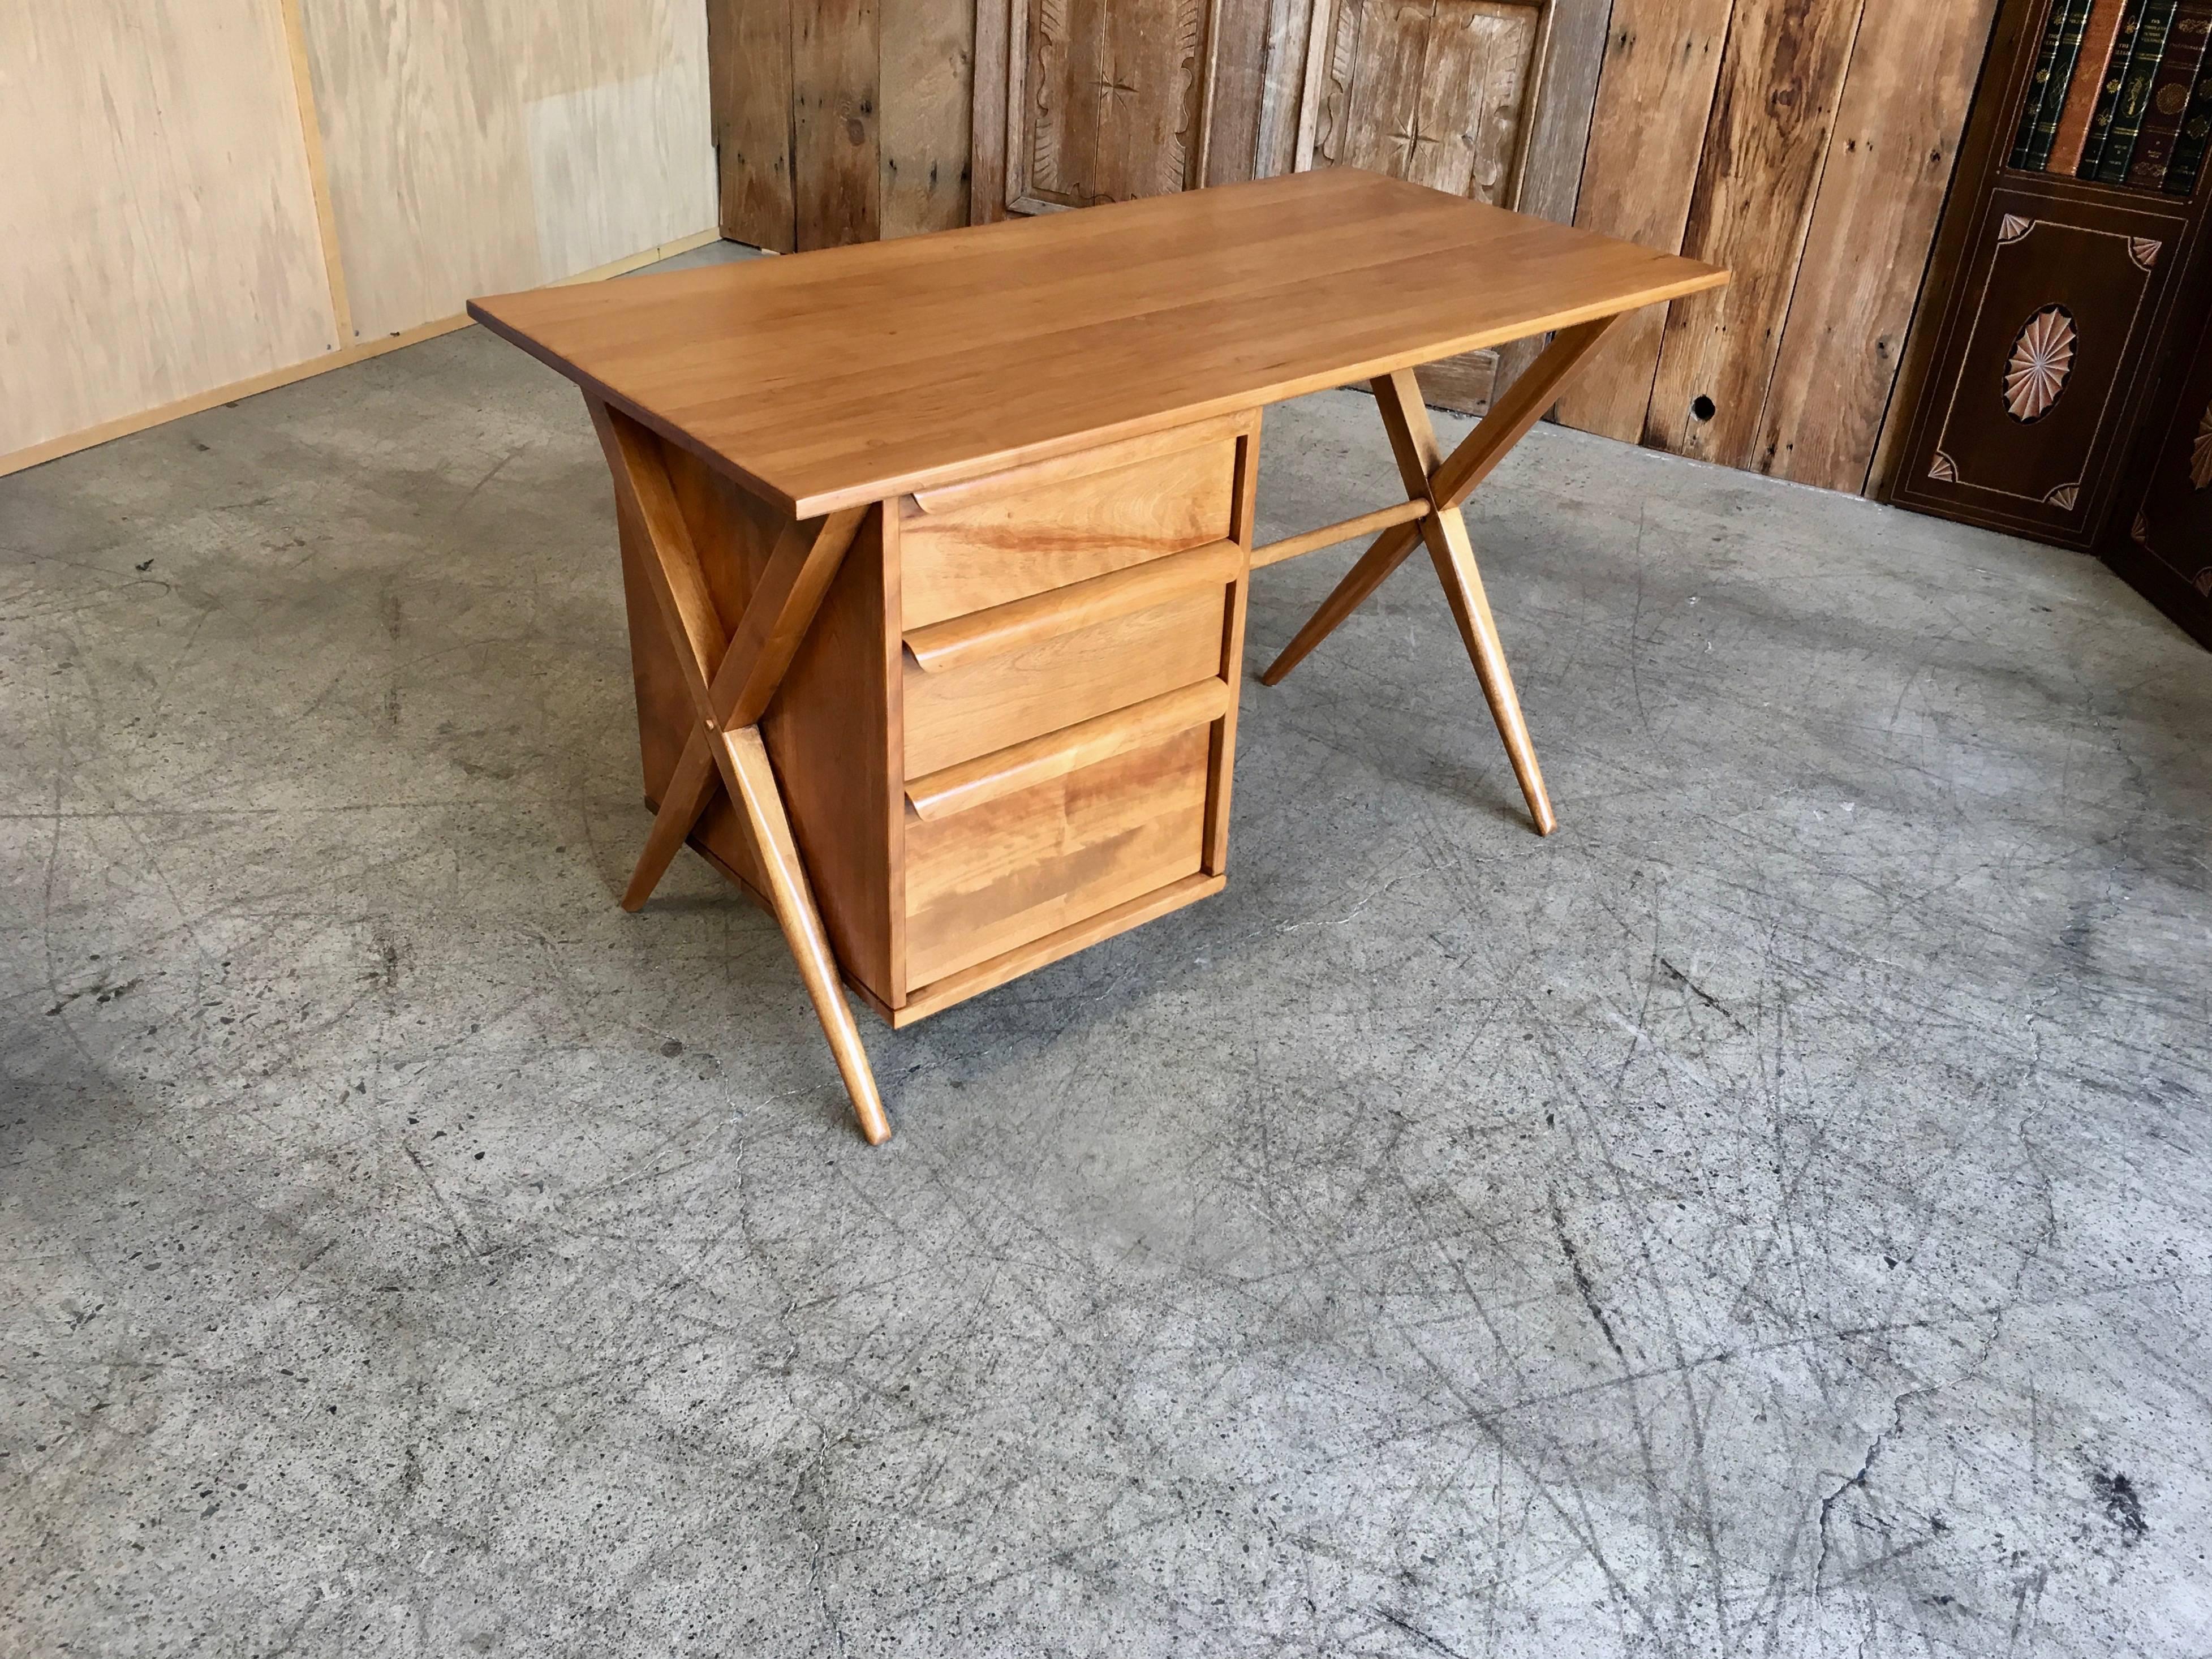 Solid maple crossed leg desk with book cubby on the back side.